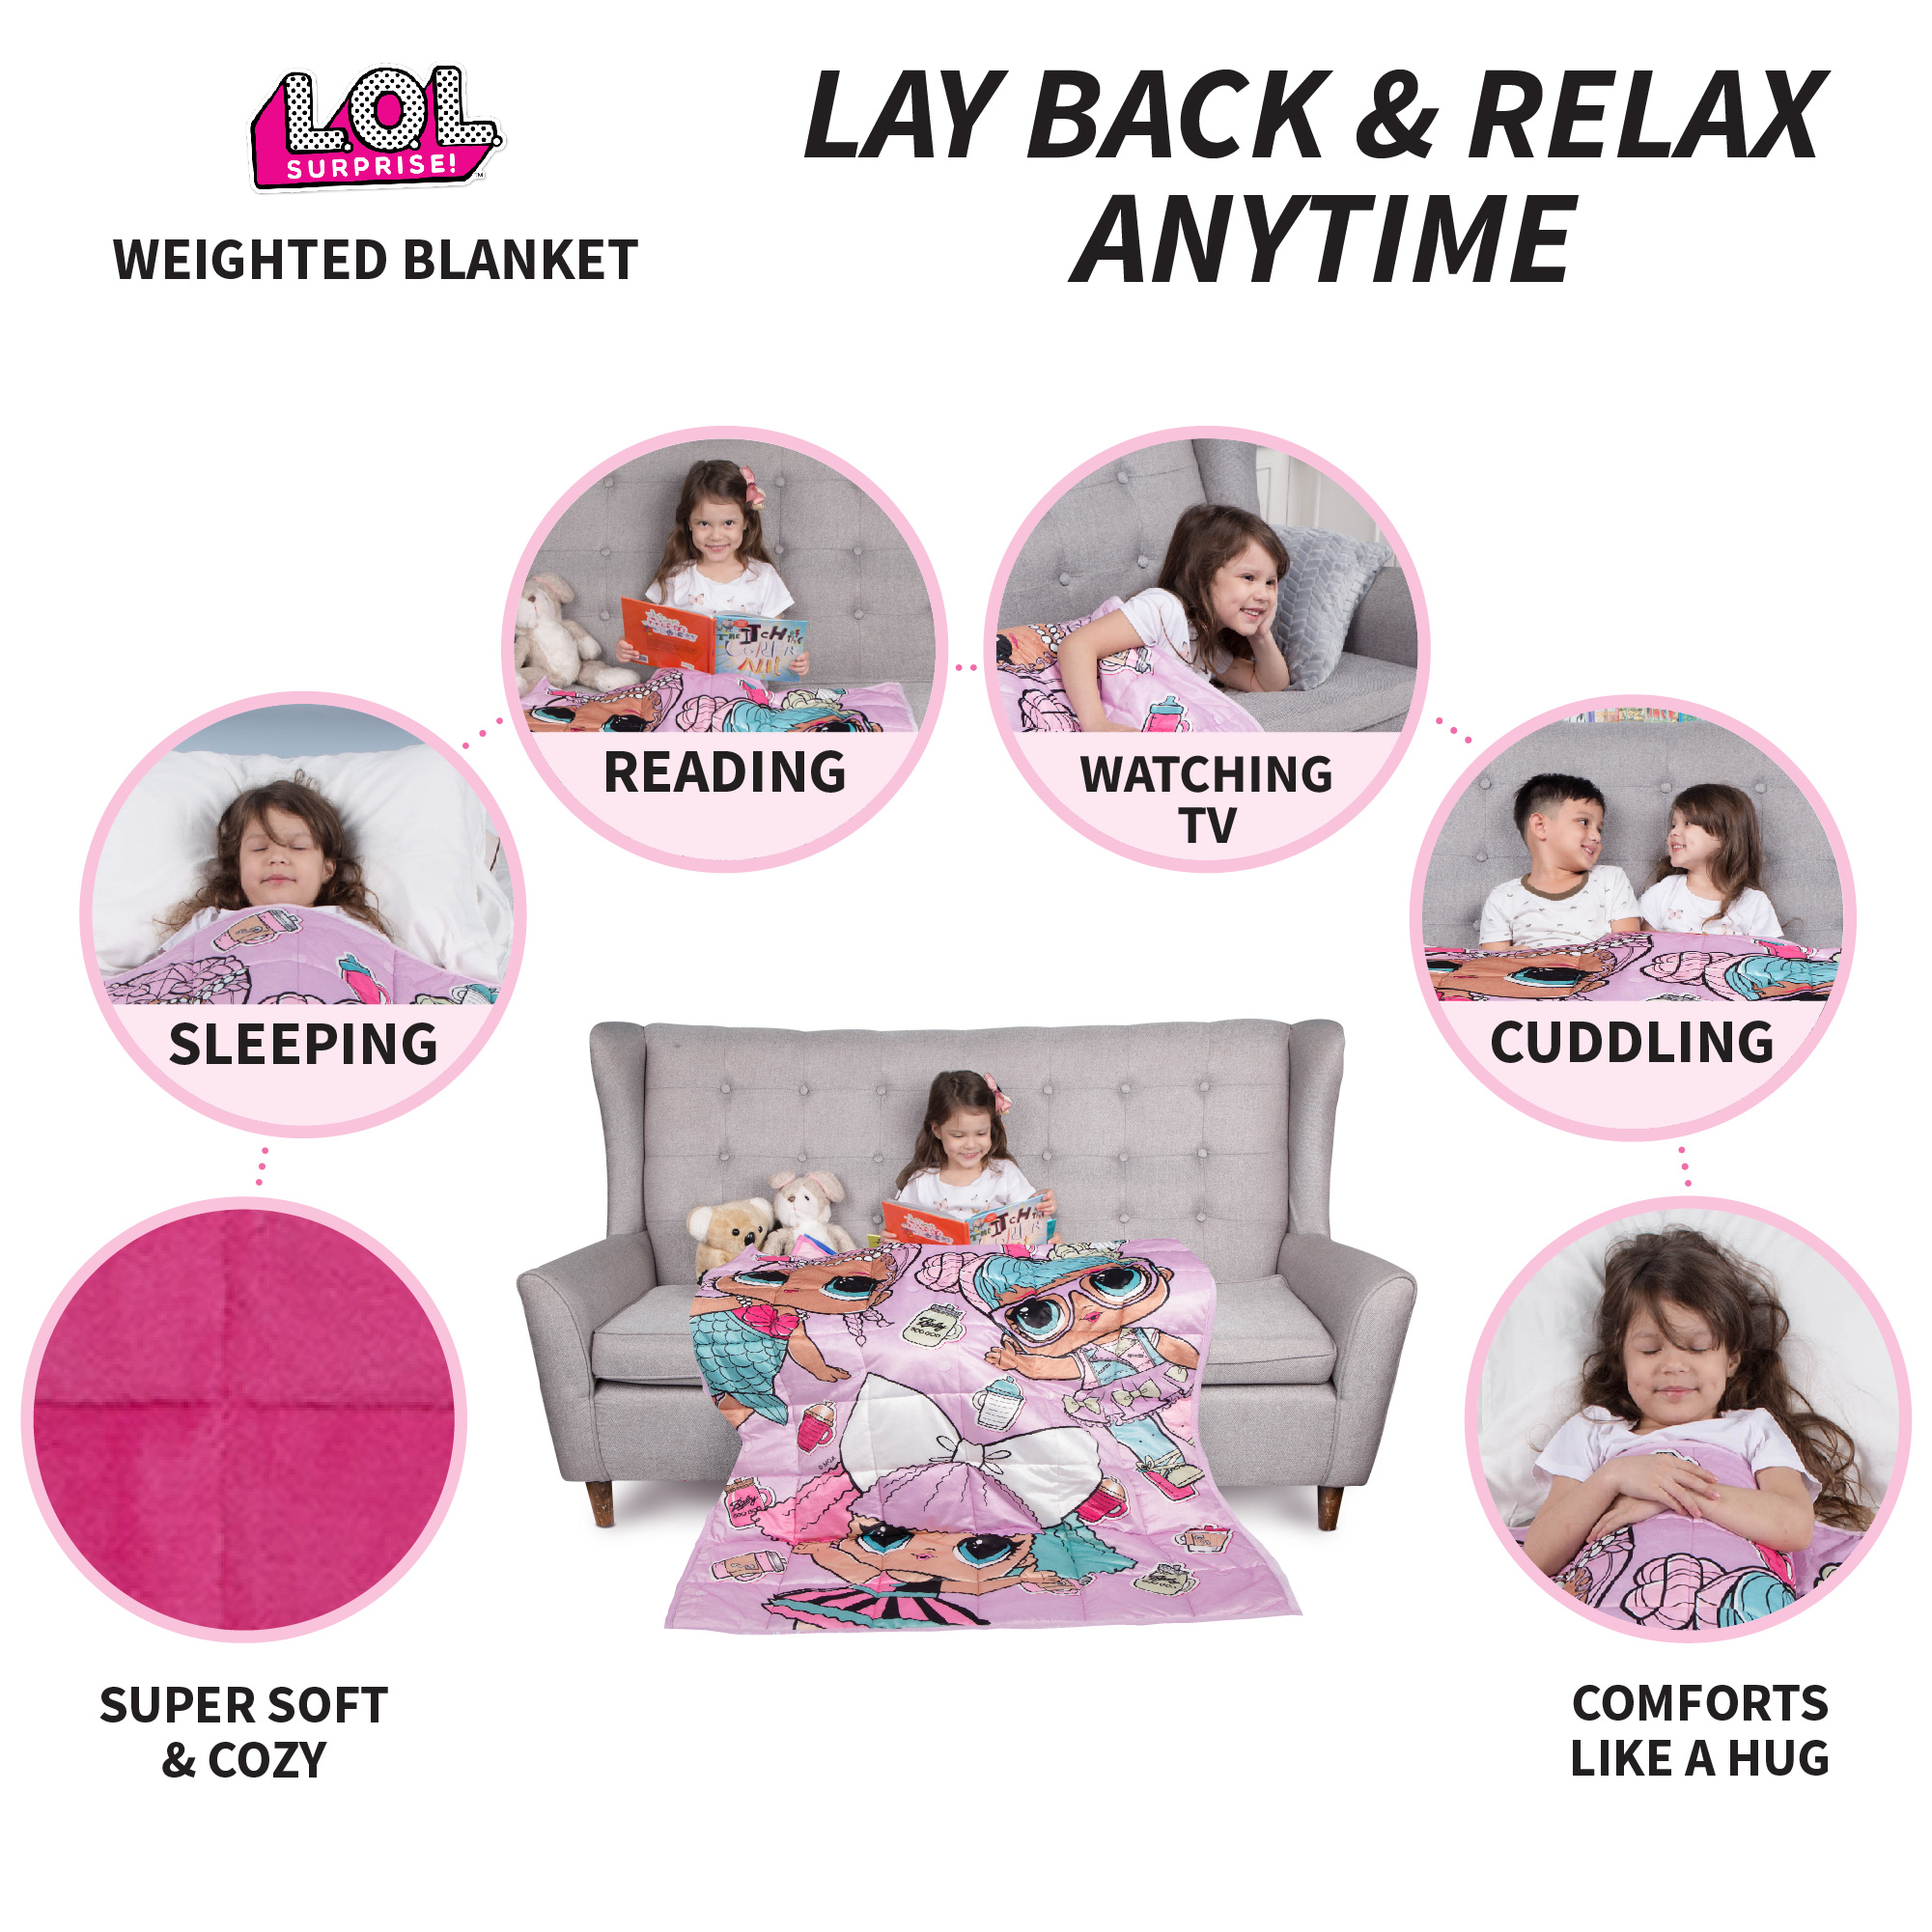 LOL Surprise Frozen Kids Weighted Blanket, 4.5lb, 36 x 48, Pink, MGA - image 5 of 11